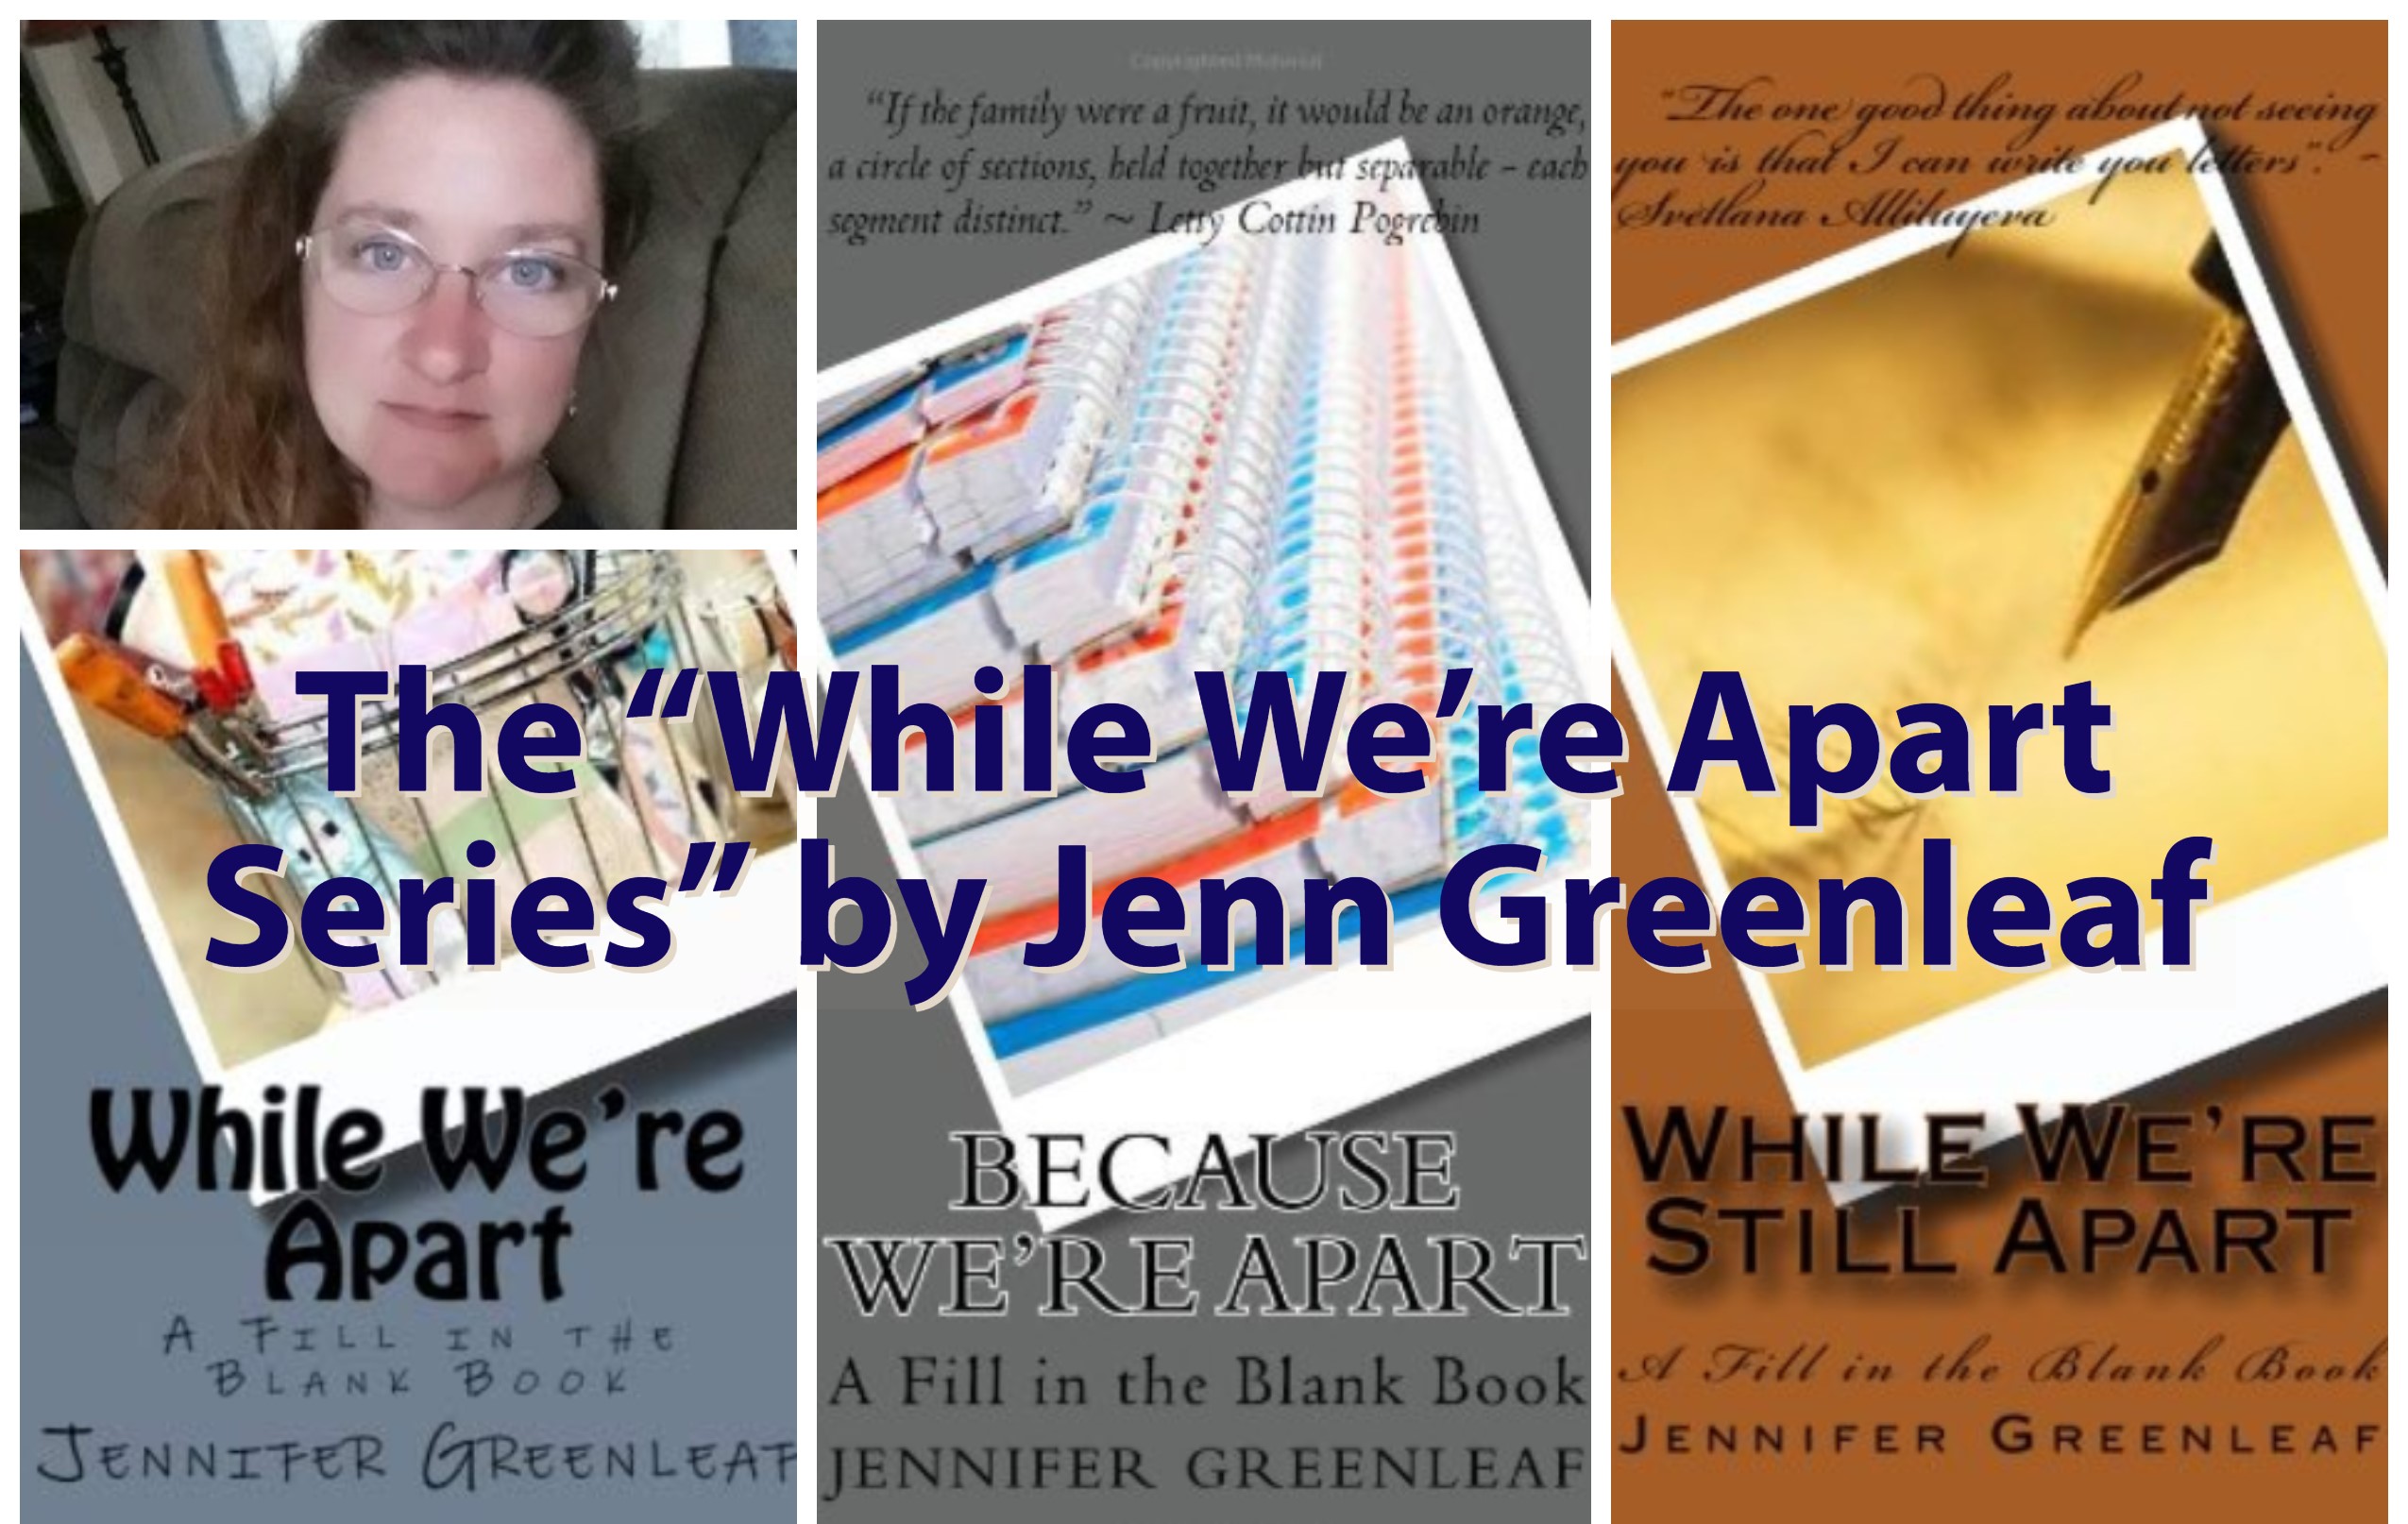 The While We're Apart Series by Jennifer Greenleaf